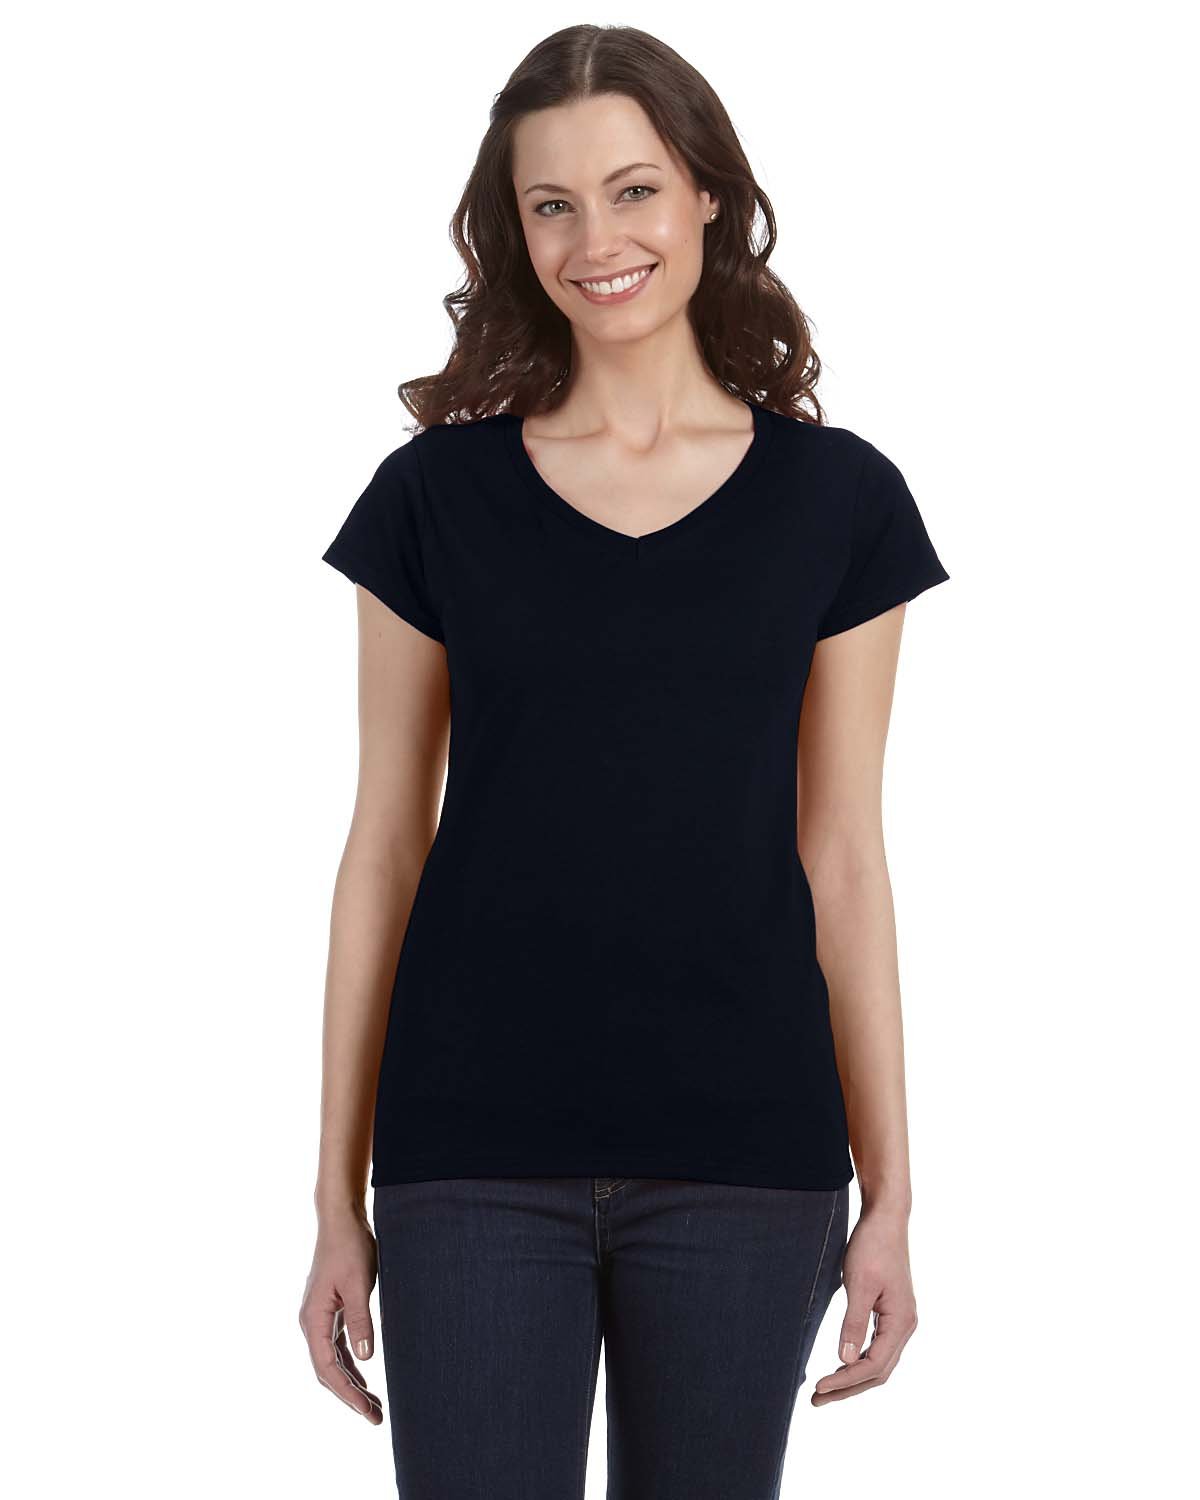 Gildan Ladies' SoftStyle®  Fitted V-Neck T-Shirt BLACK 